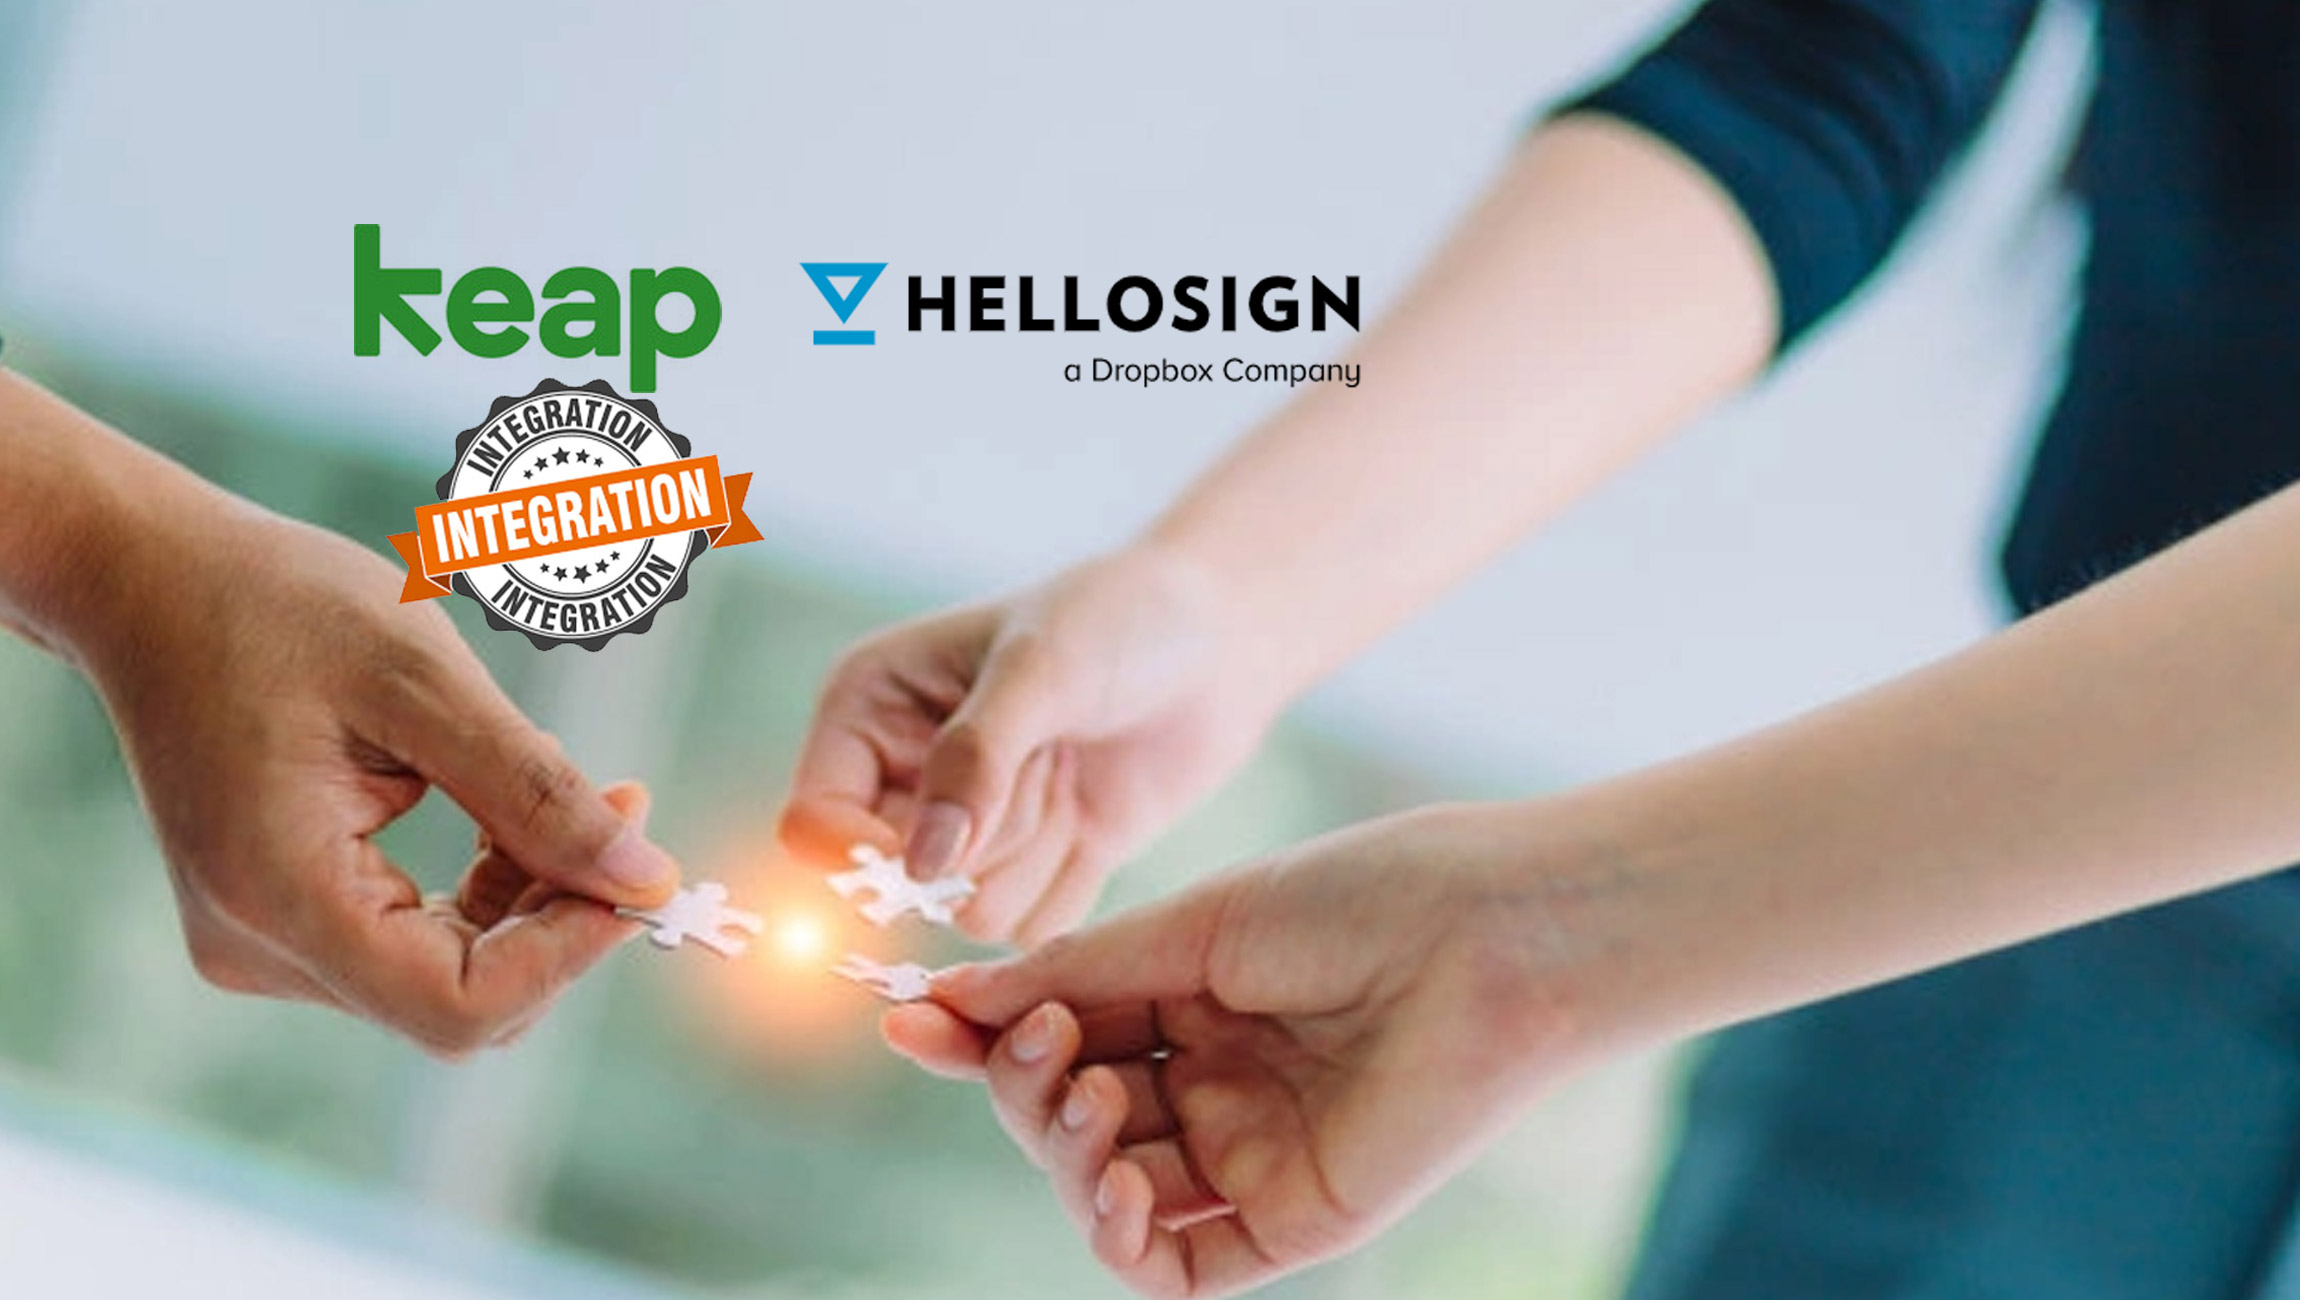 New Keap Integration with eSignature Provider HelloSign Saves Time, Simplifies Sales Cycle